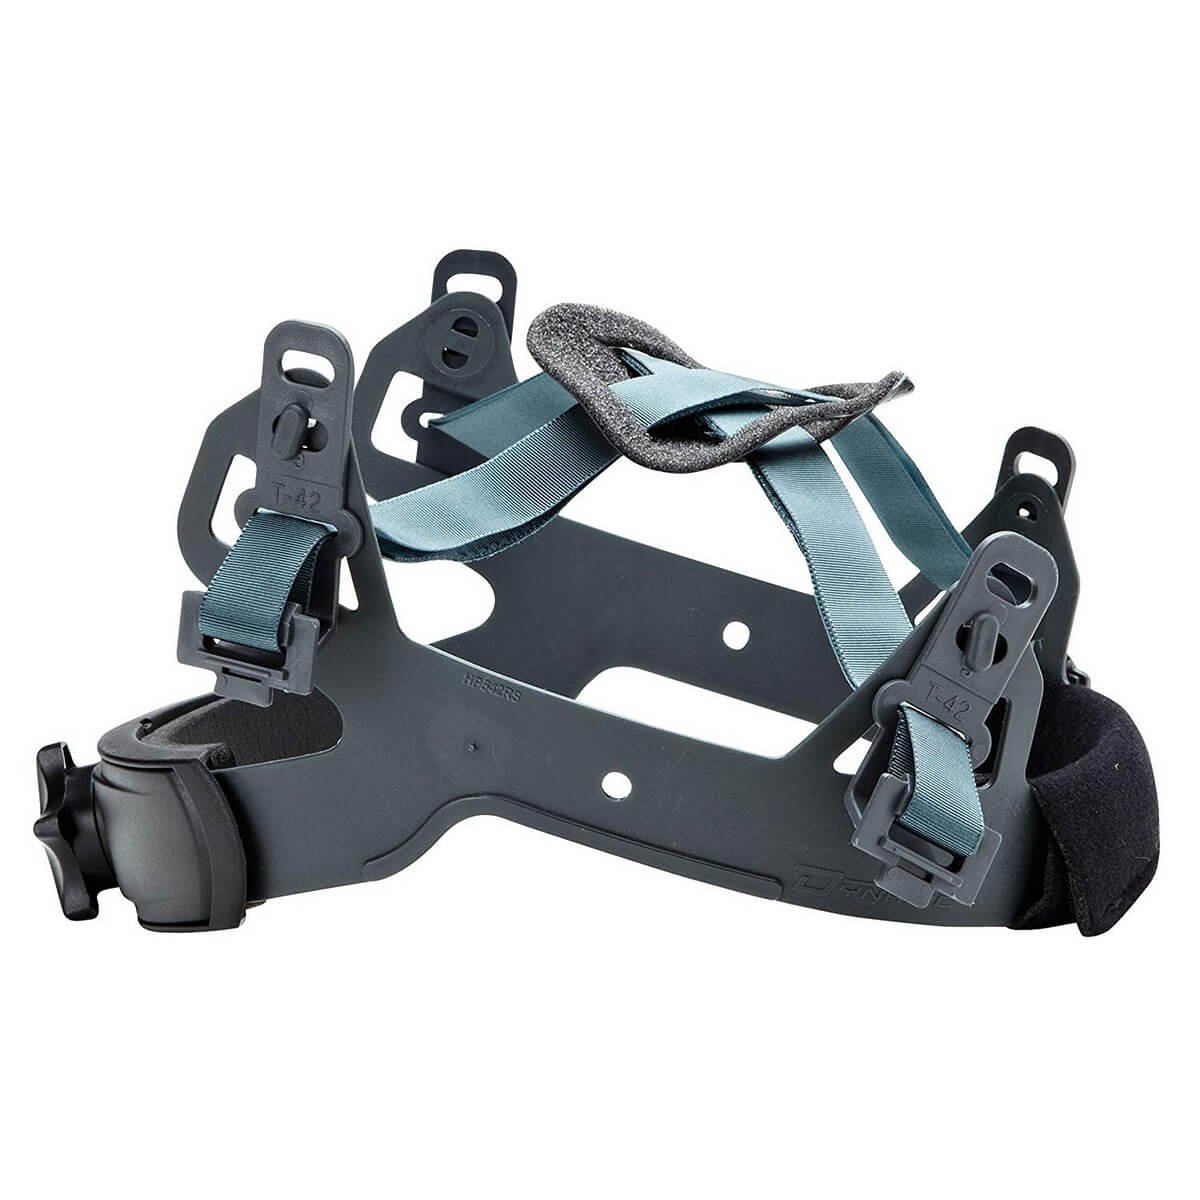 Dynamic Hard hat harness fits HP542 and HP641